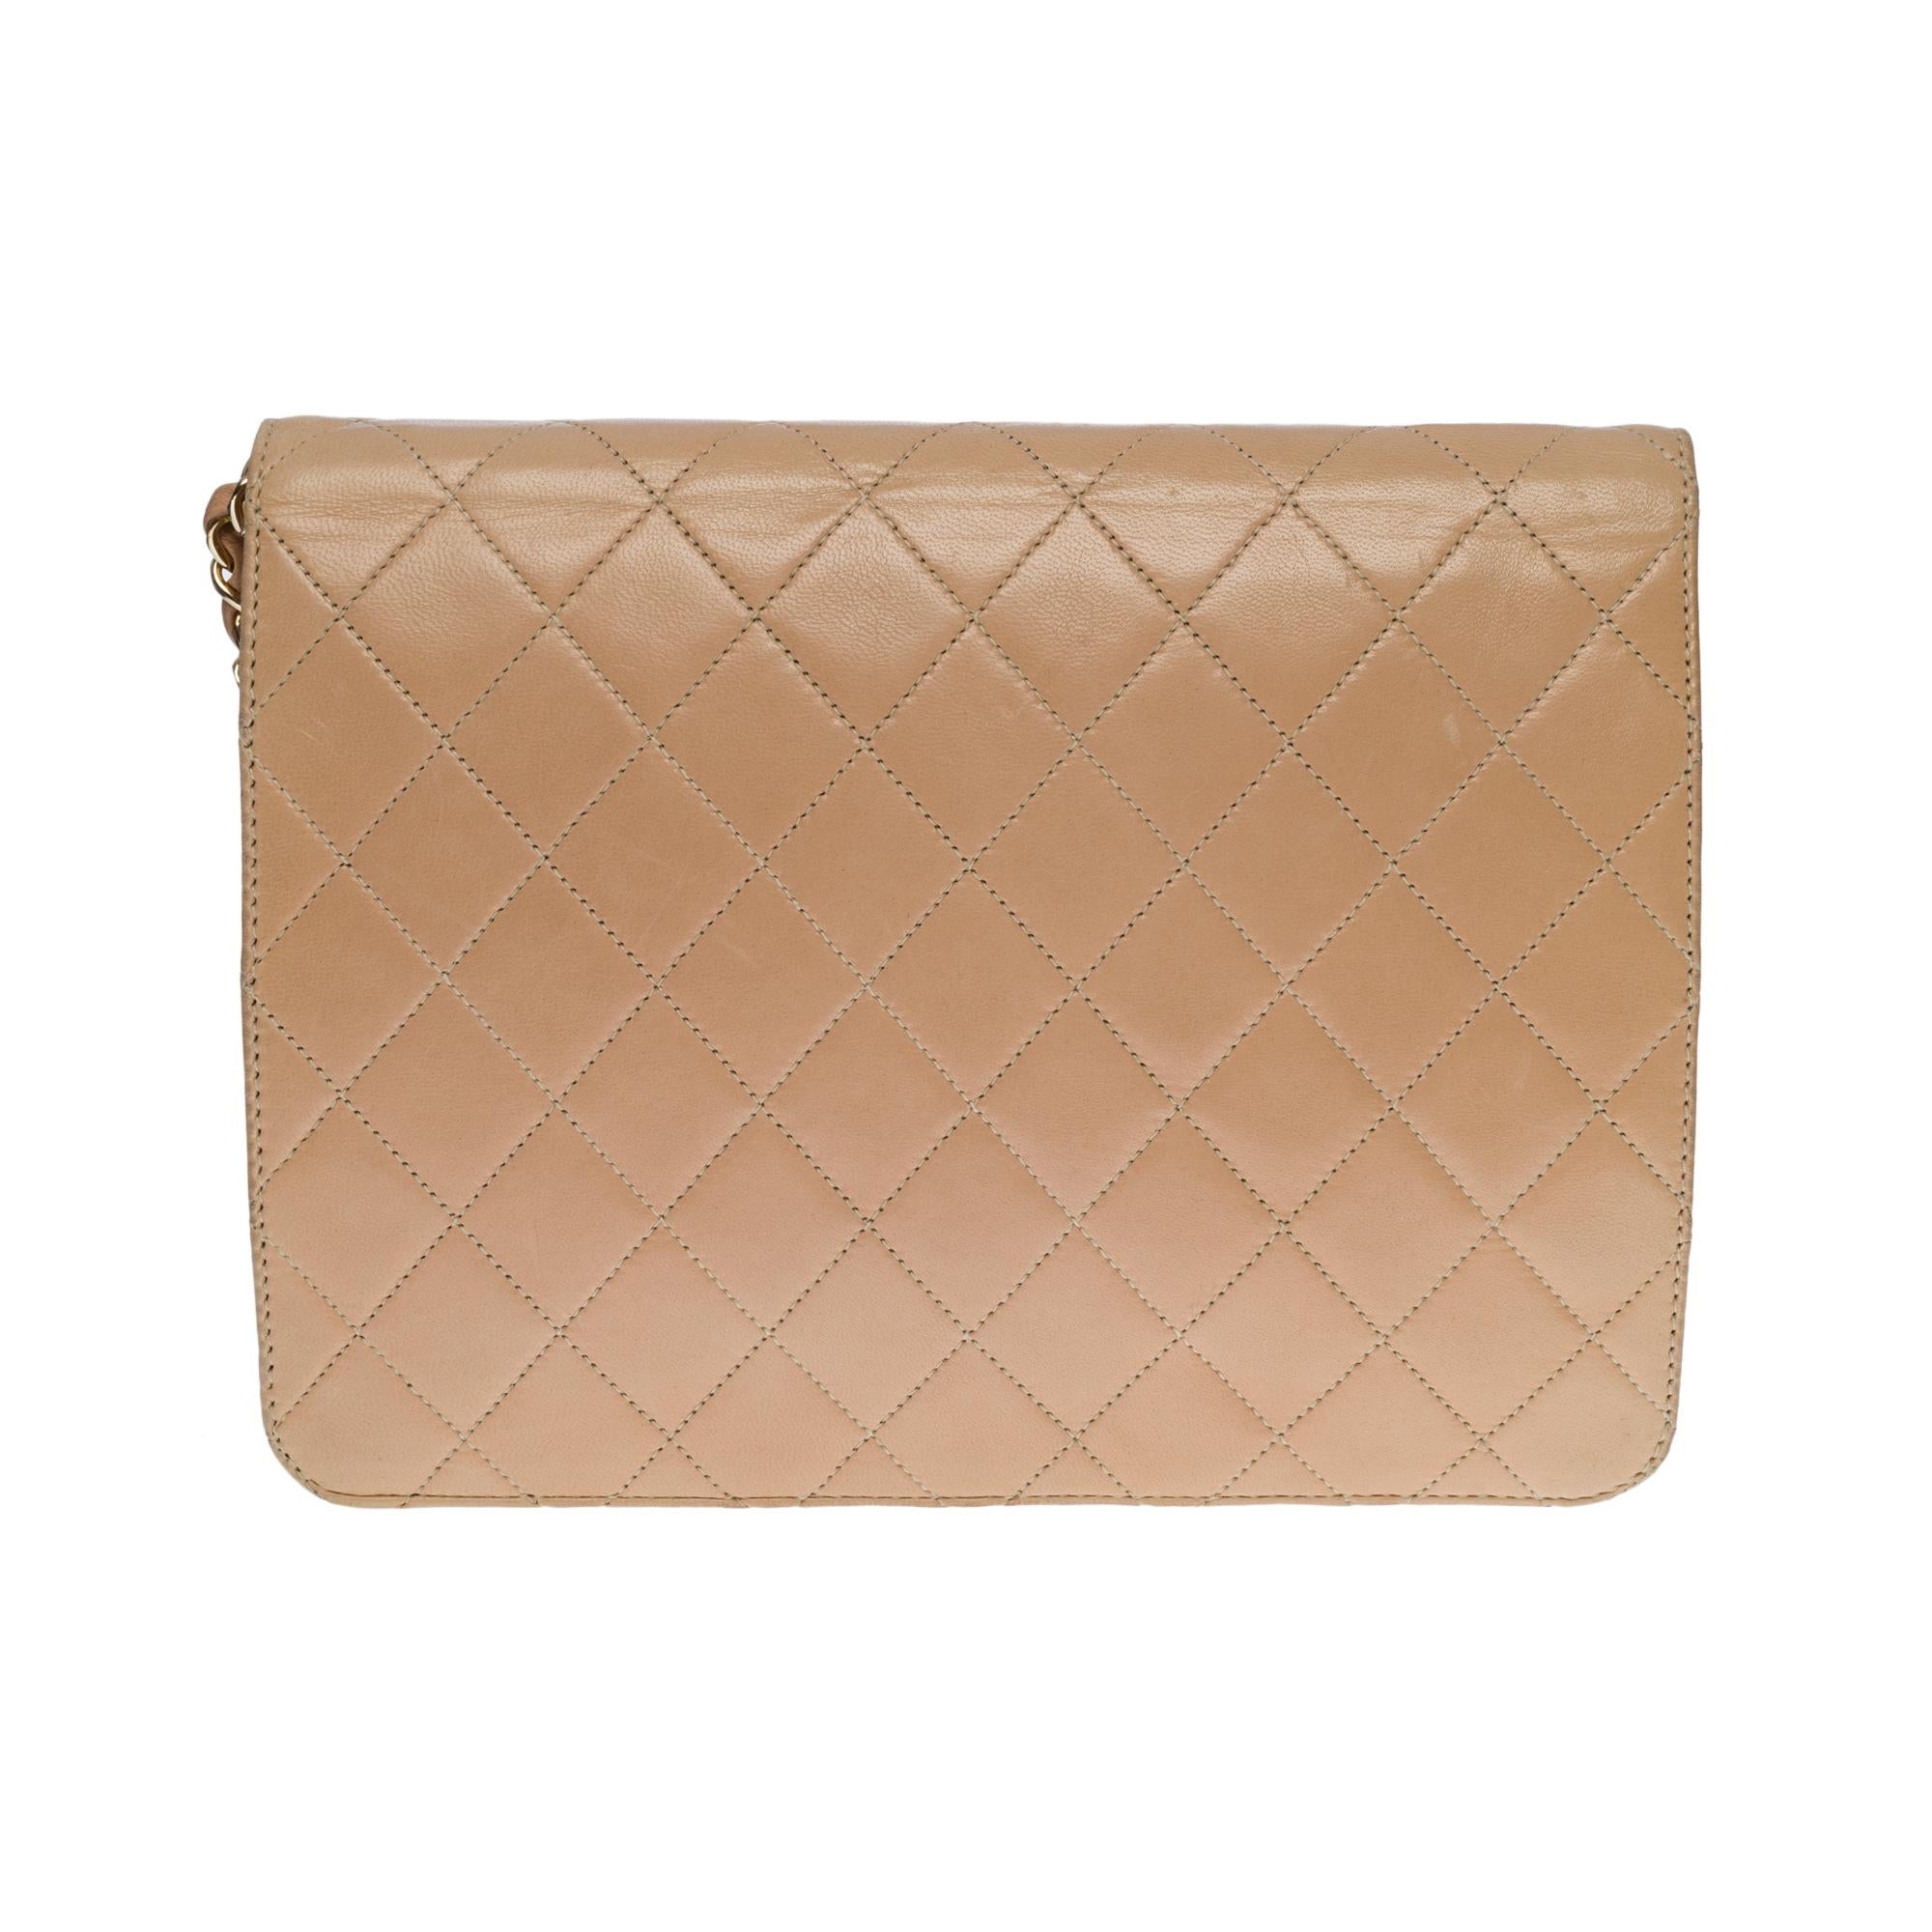 Splendid and Rare Chanel Classic Flap Bag in beige quilted leather, gold-tone metal hardware, a gold-tone metal chain handle interlaced with beige leather for shoulder and crossbody support
 
Backpack pocket
Closure in gilded metal on flap 
Beige